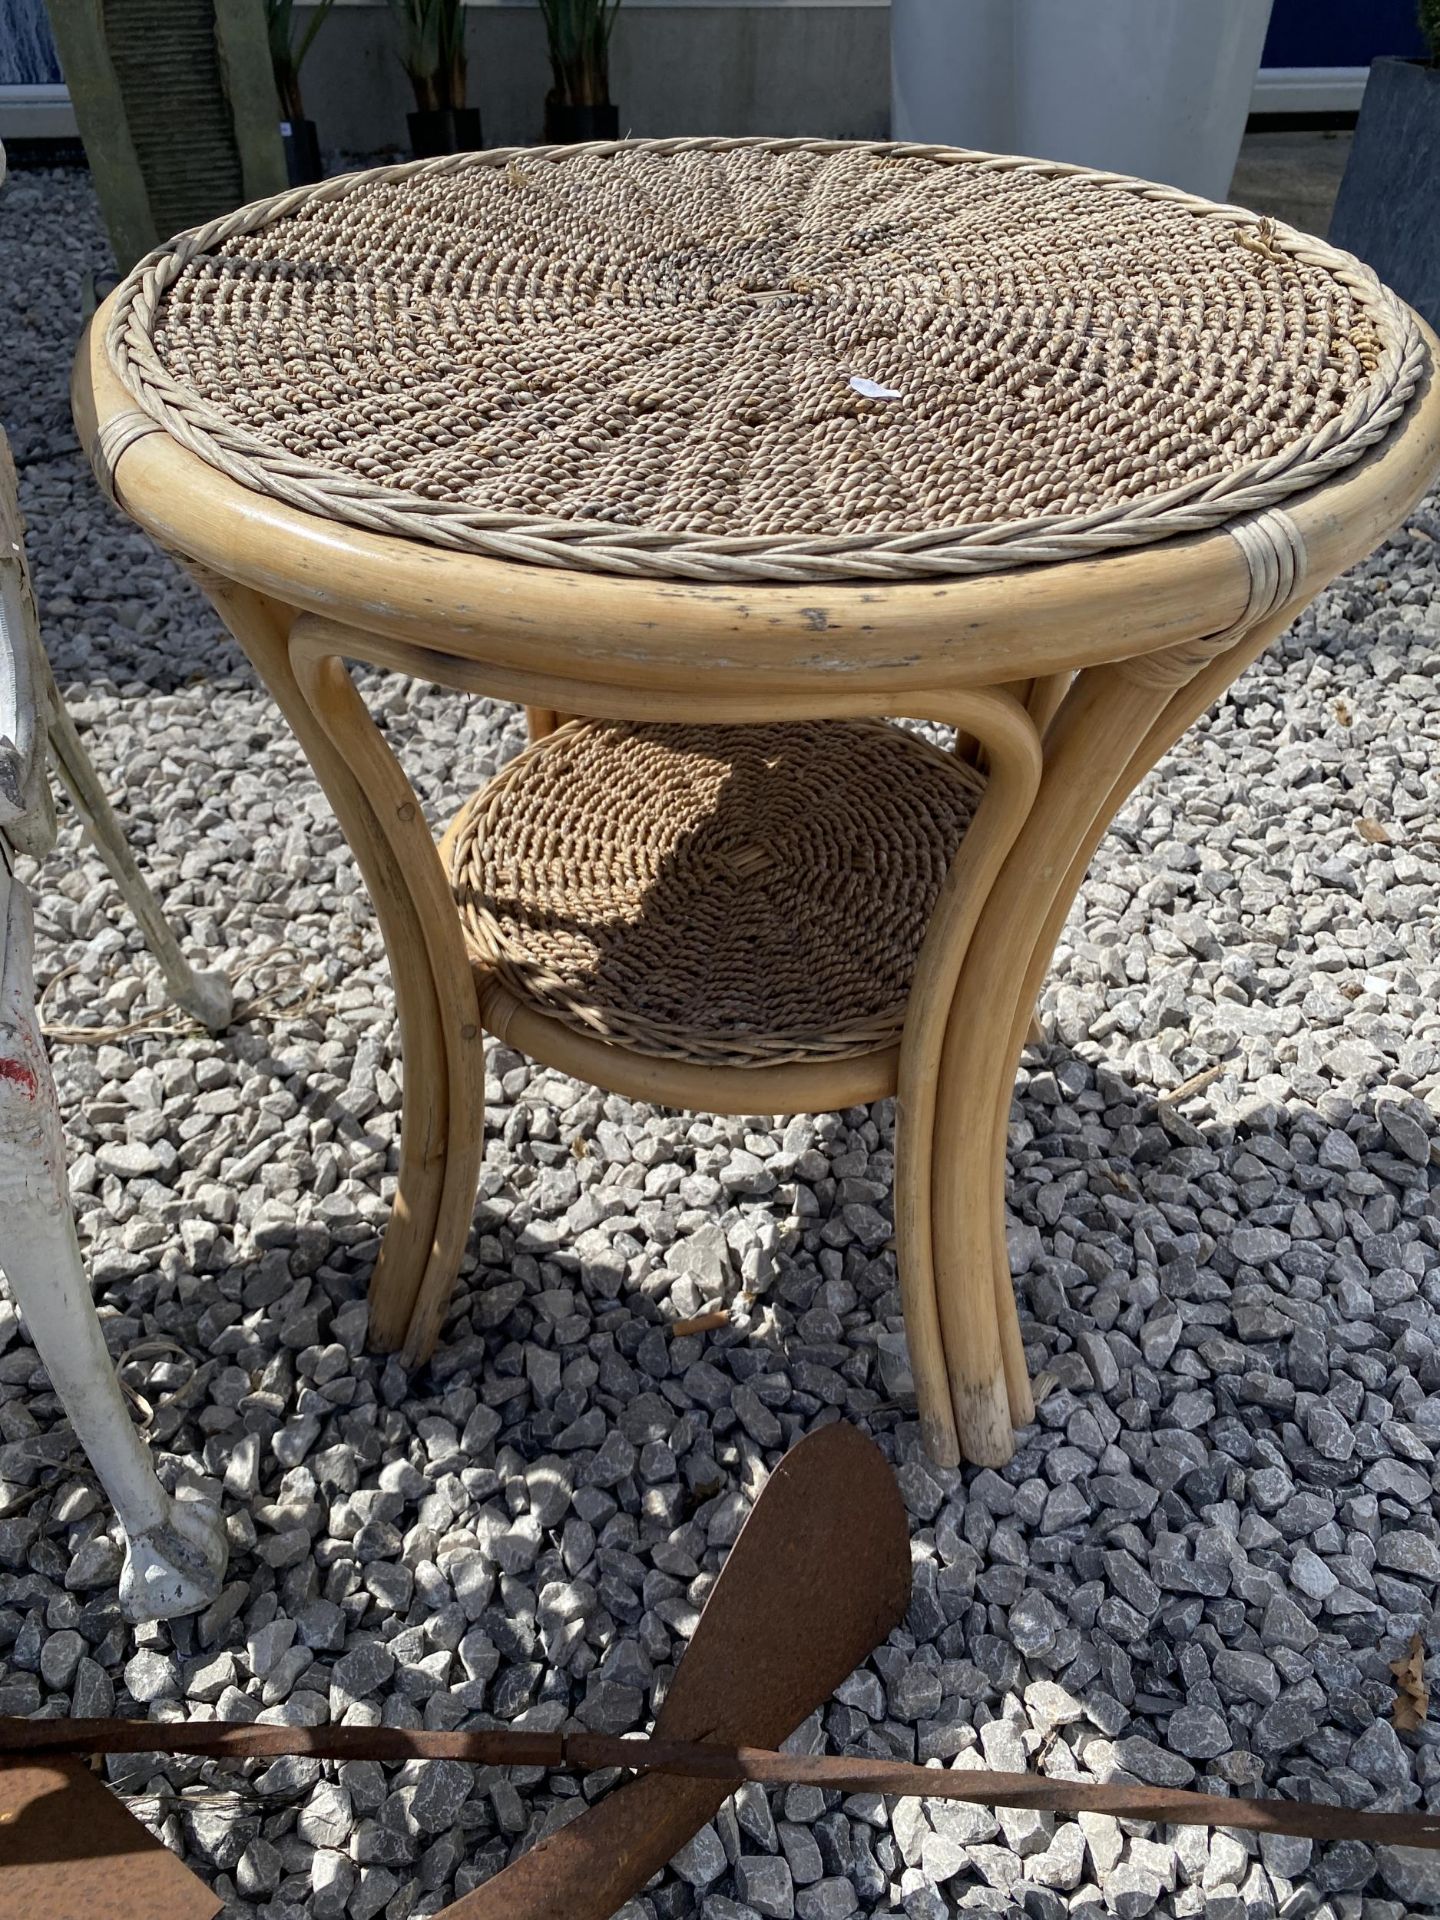 THREE GARDEN ITEMS TO INCLUDE A BISTRO CHAIR, CIRCULAR WICKER SIDE TABLE AND STEEL AEROPLANE - Image 2 of 4